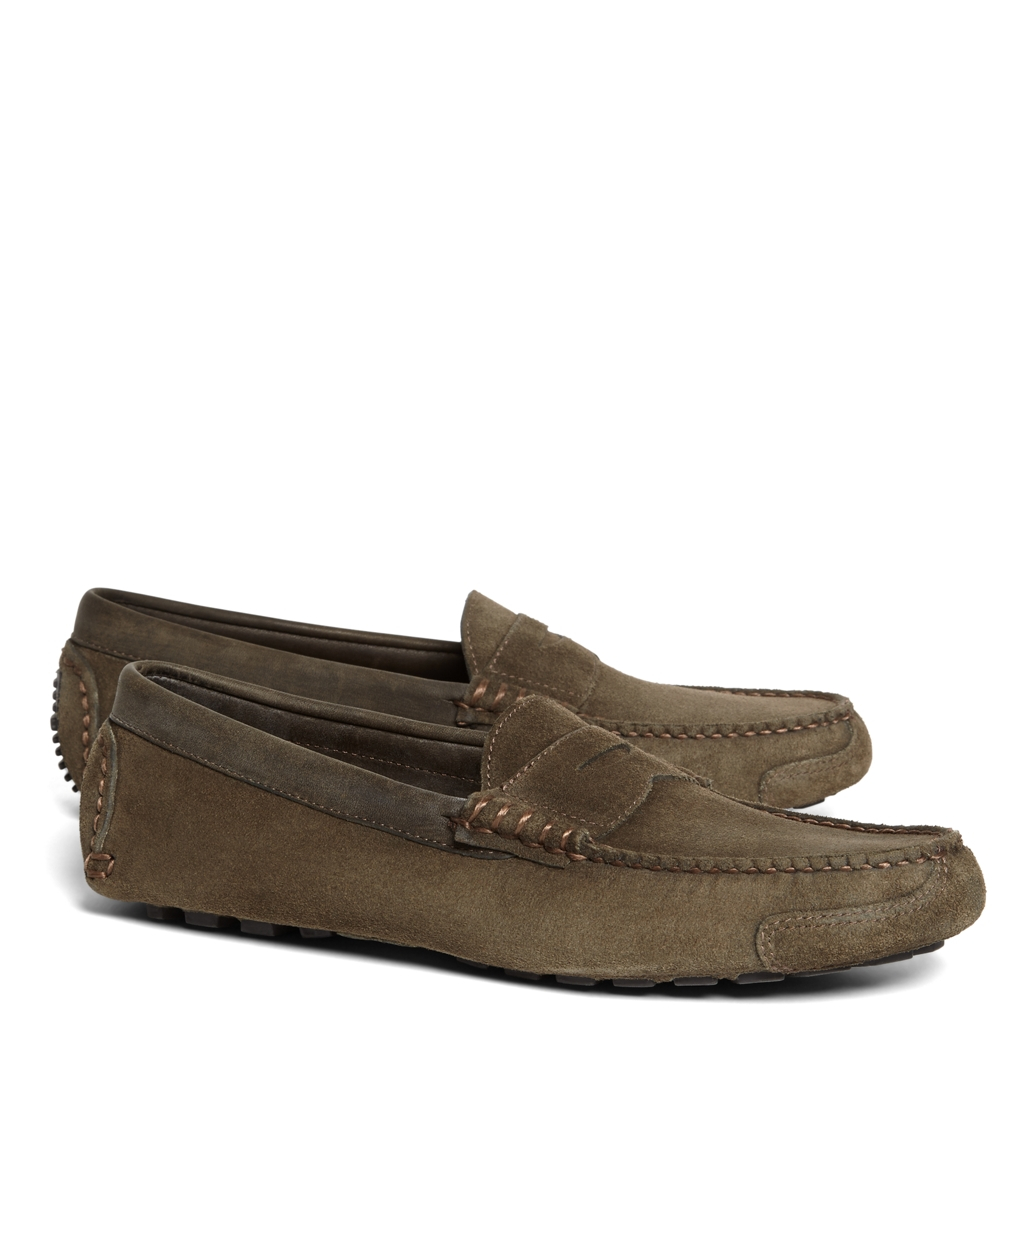 Lyst - Brooks Brothers Horween Suede Penny Driving Moccasins in Gray